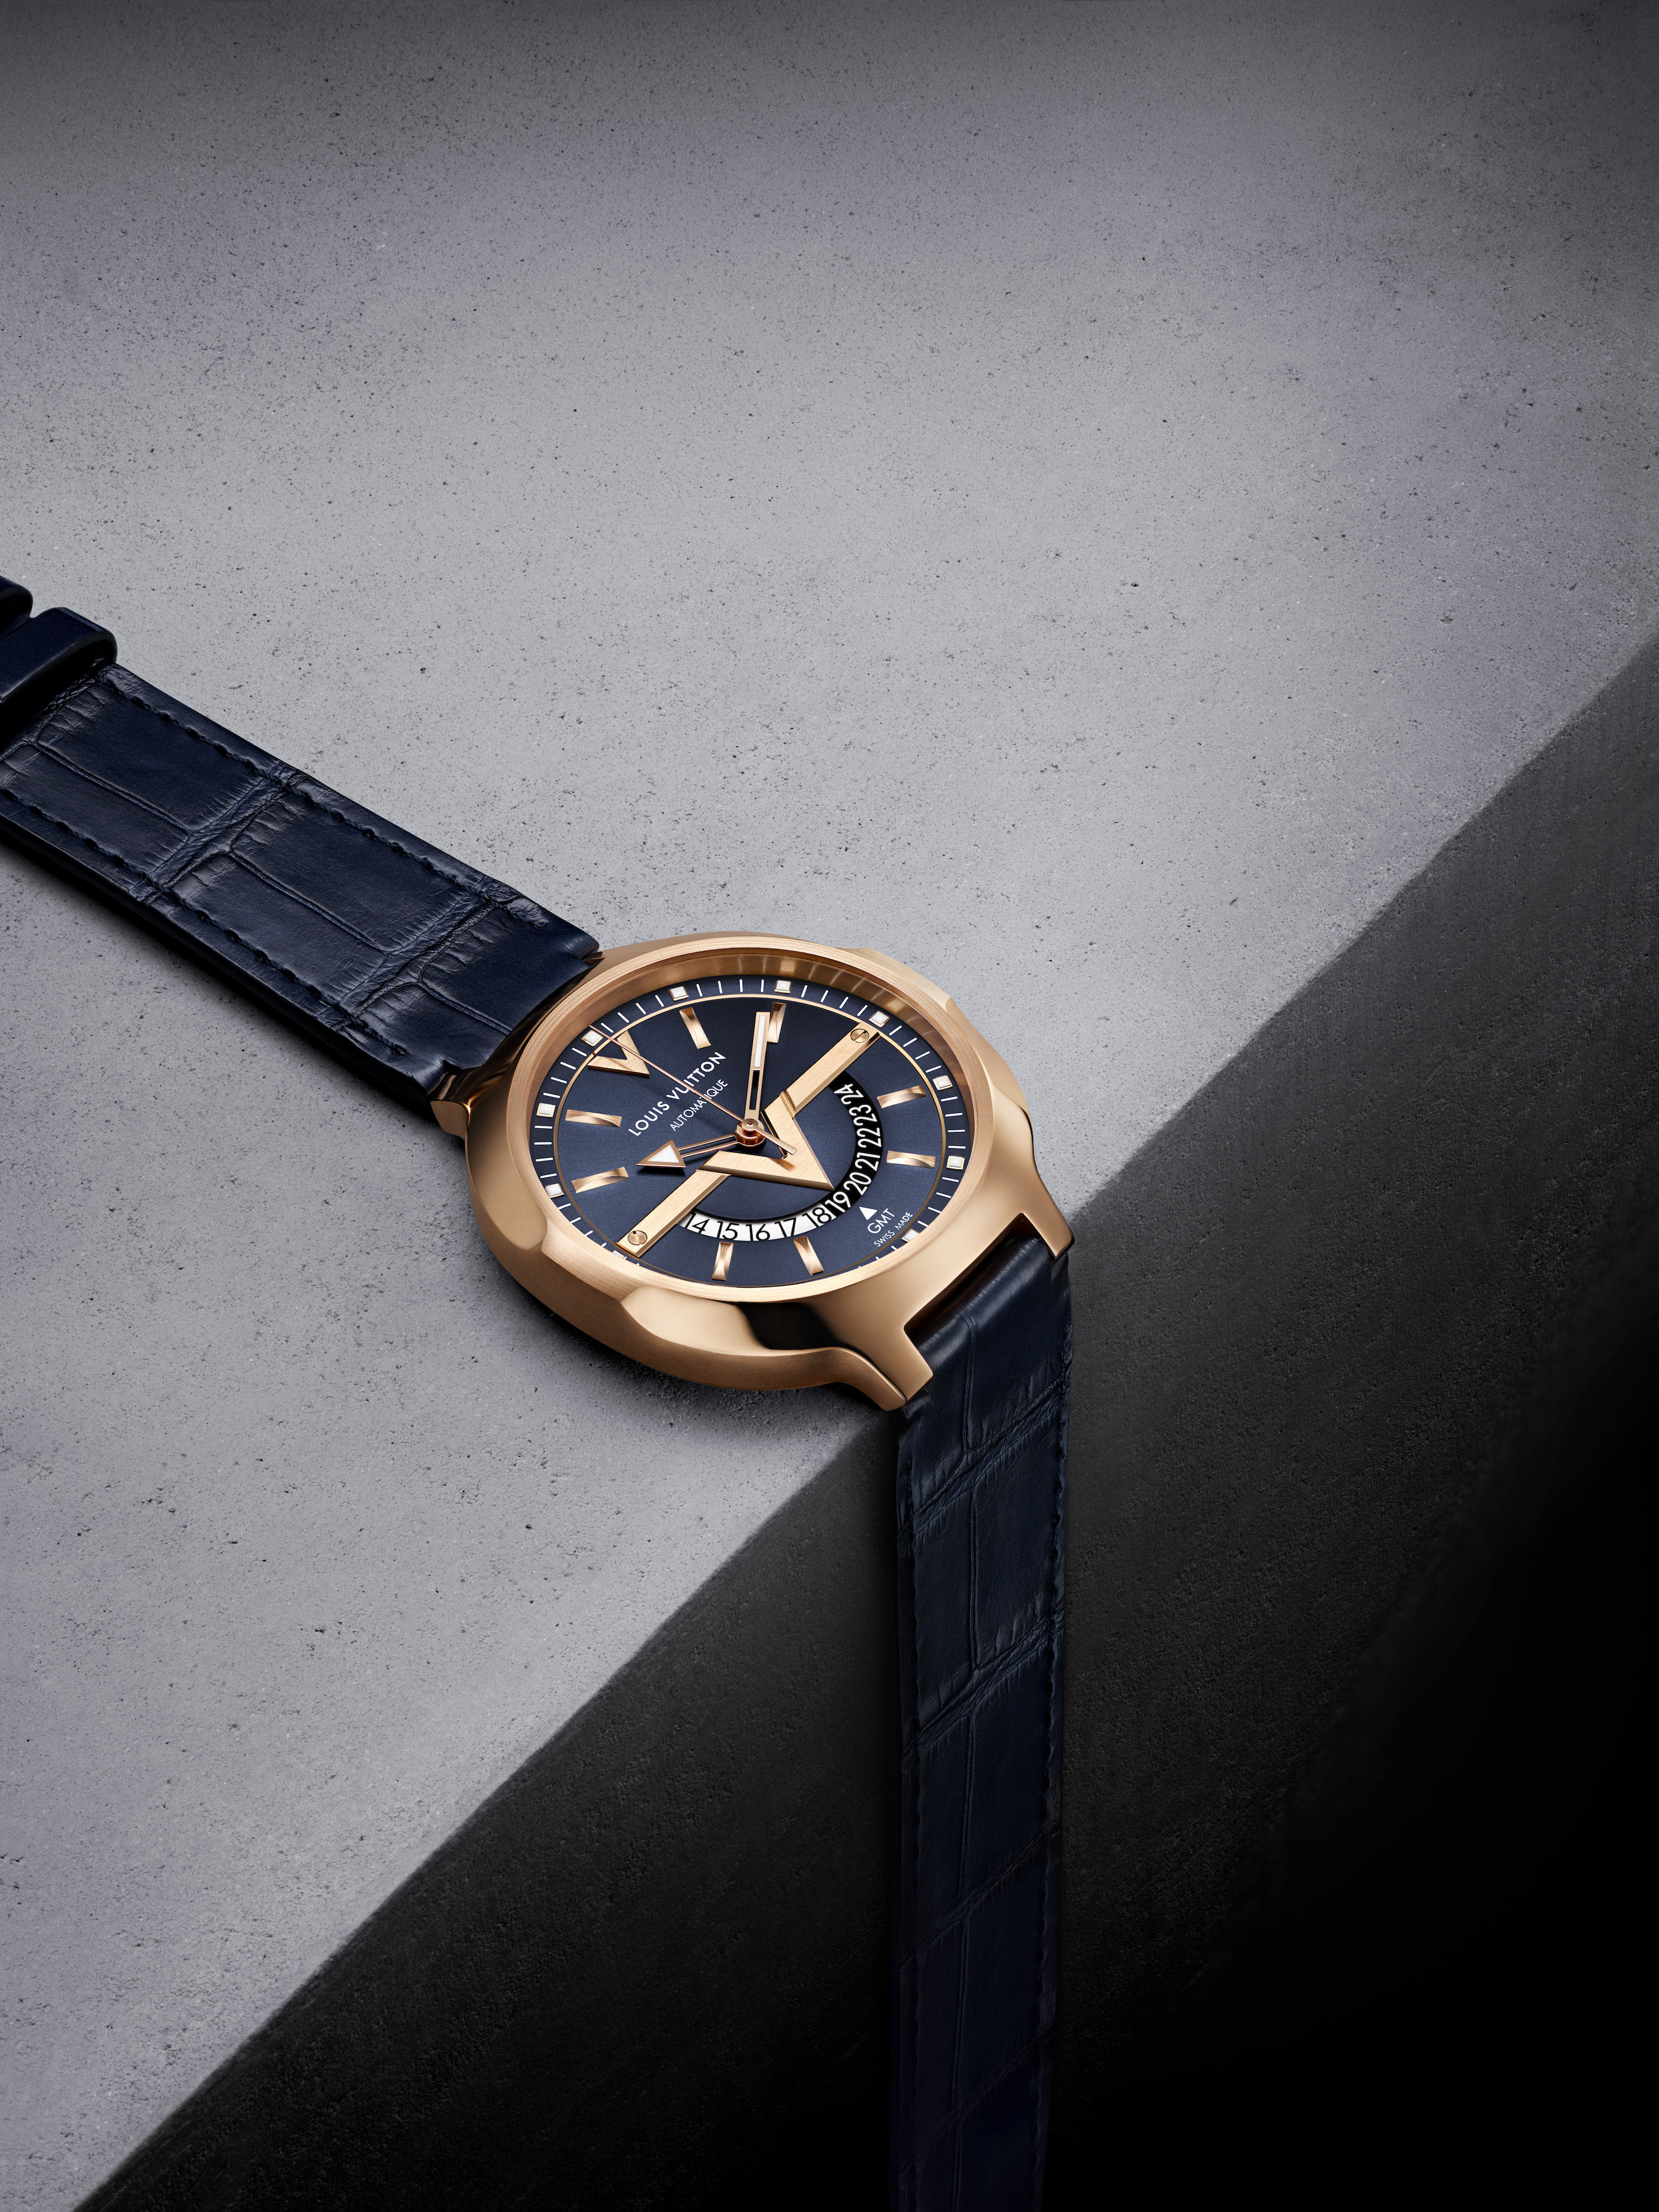 Louis Vuitton’s new Voyager watch is perfect for travel